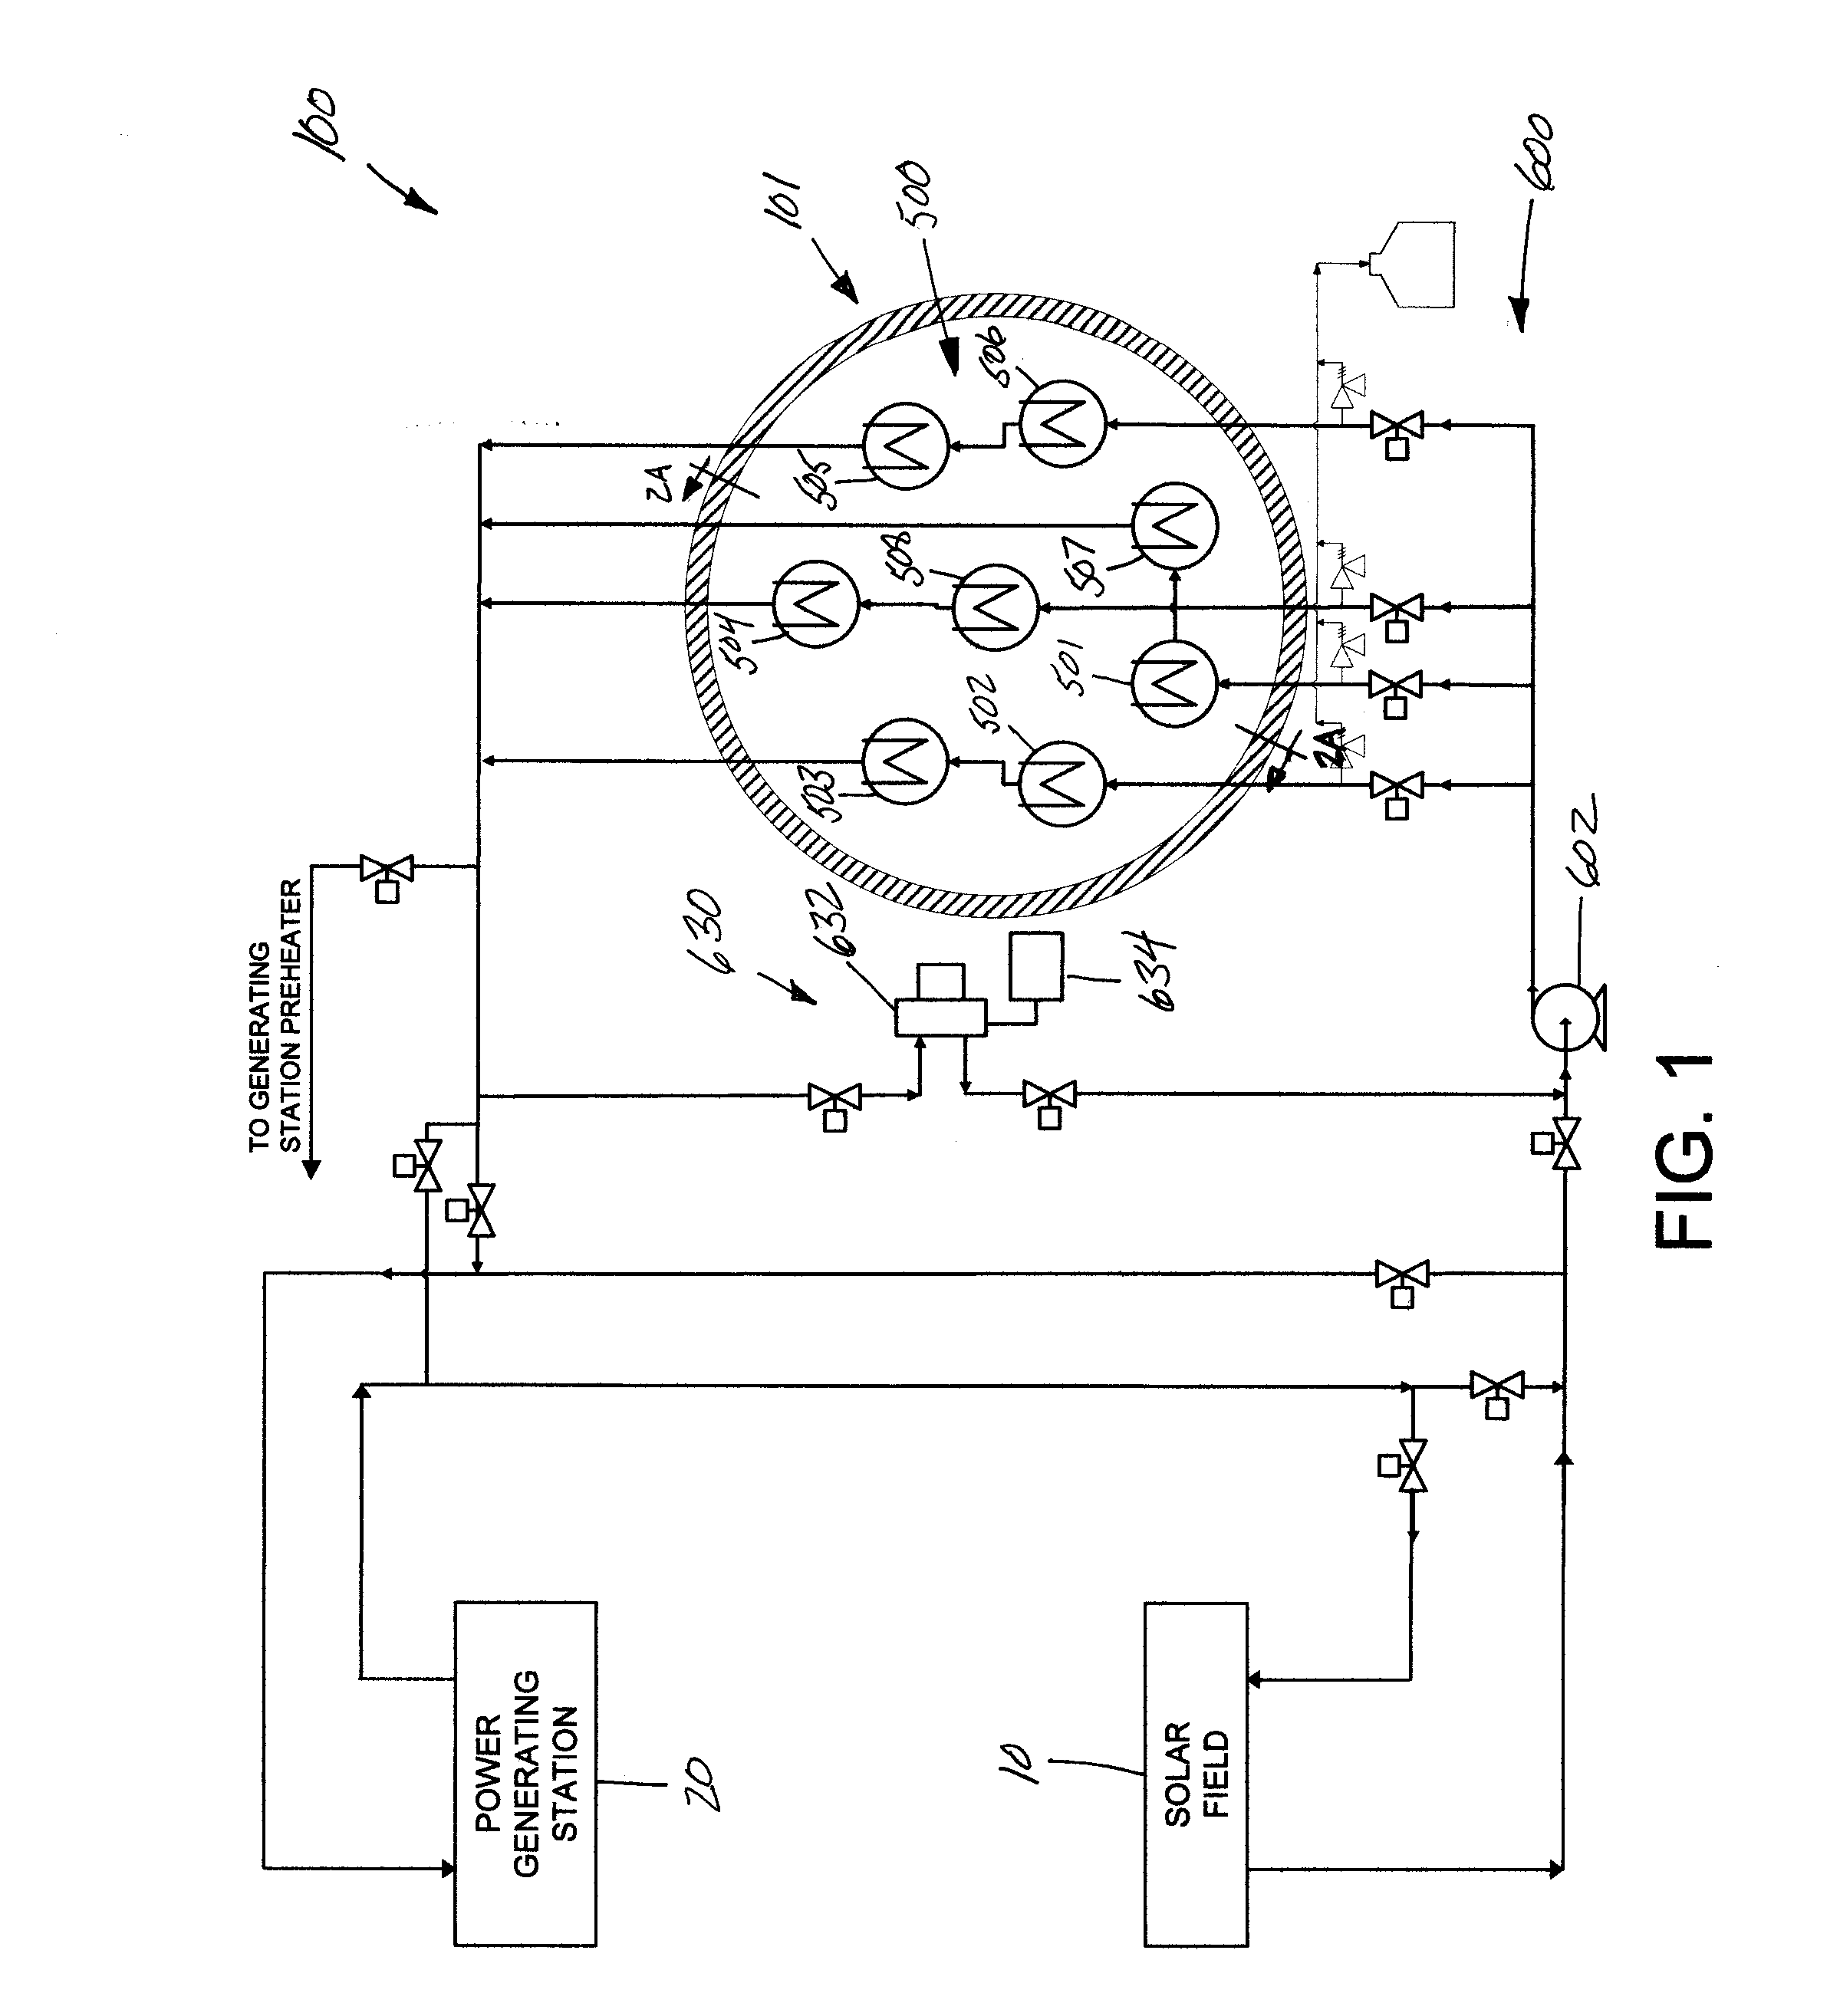 Thermal energy storage vessel, systems, and methods